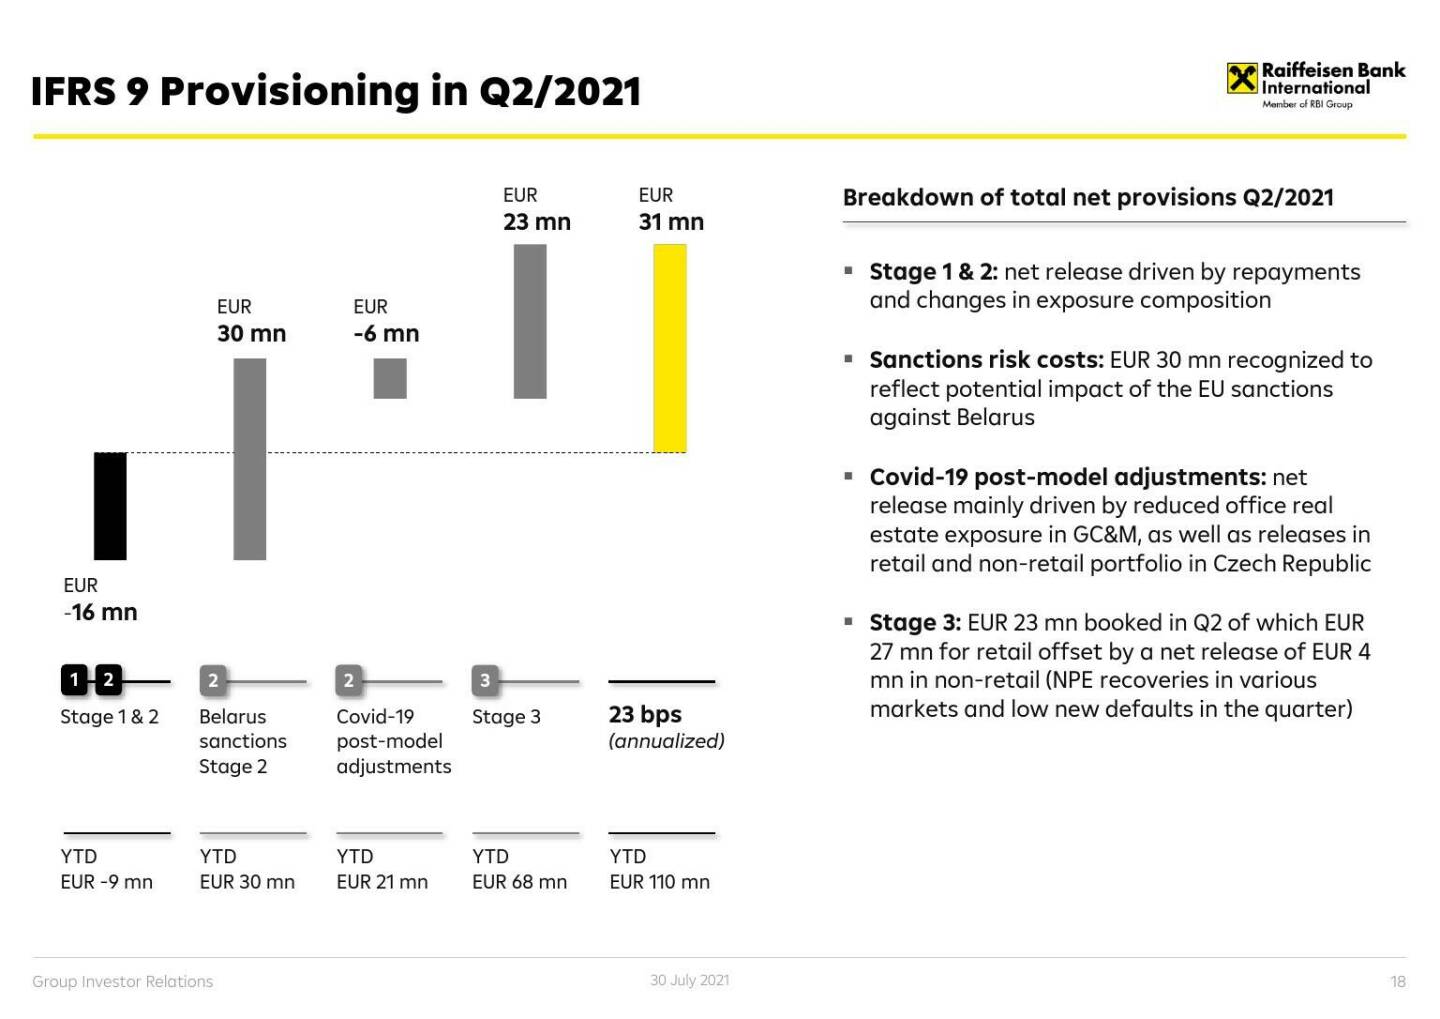 RBI - IFRS 9 Provisioning in Q2/2021